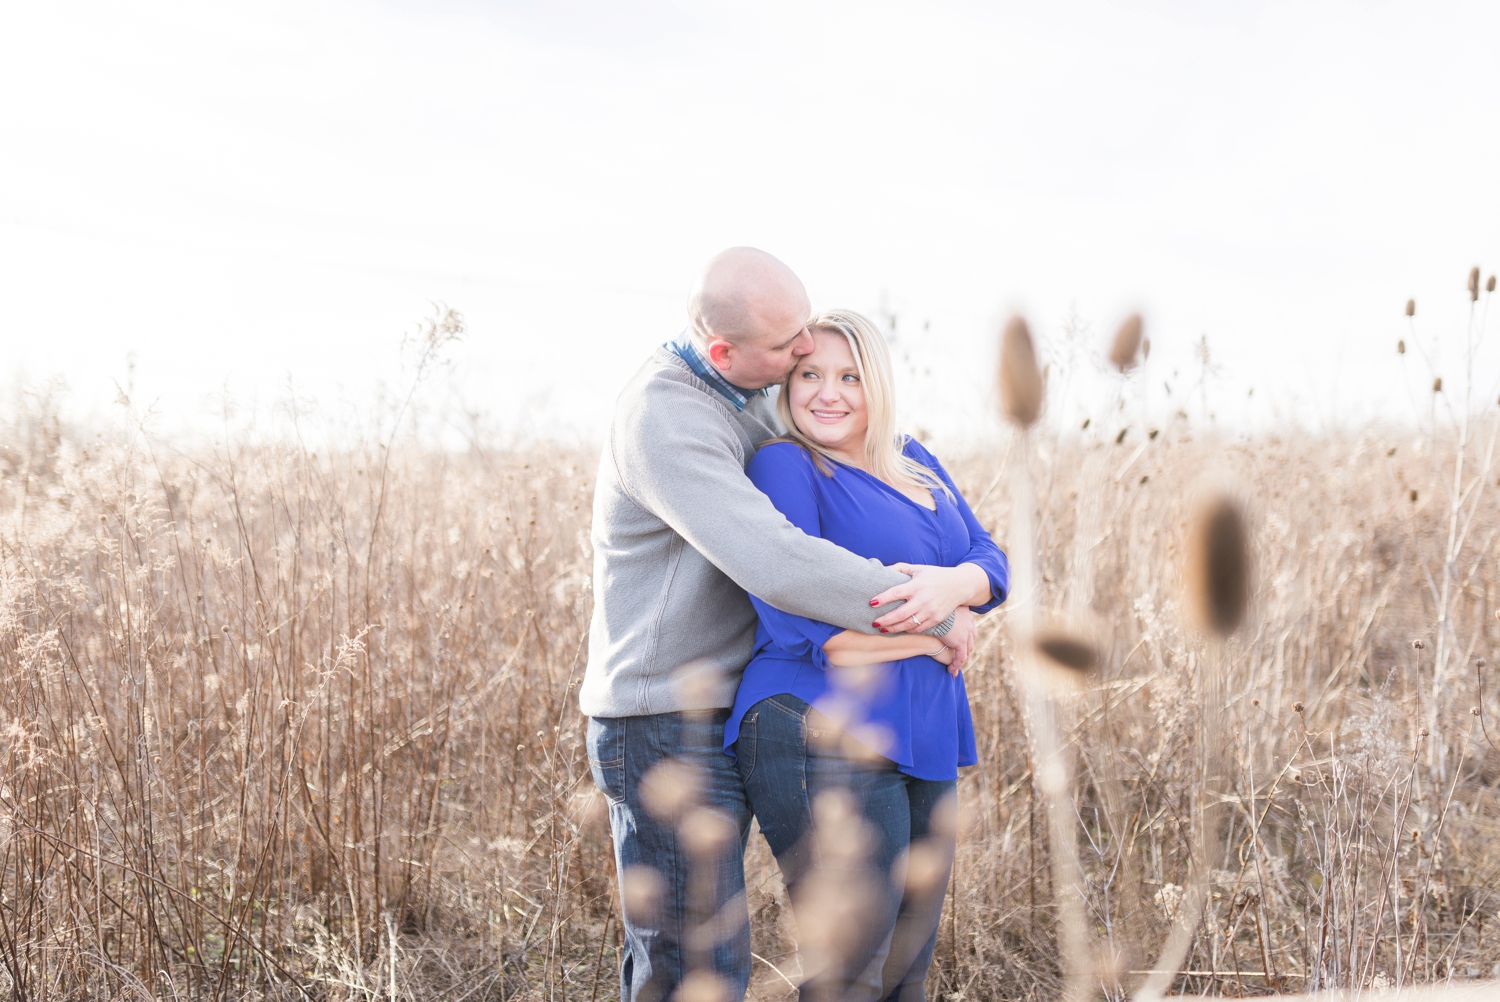 winter-engaged-couple-at-their-photo-session-at-the-scioto-audubon-park-near-grange-audubon-center-with-walkways-and-grass_0327